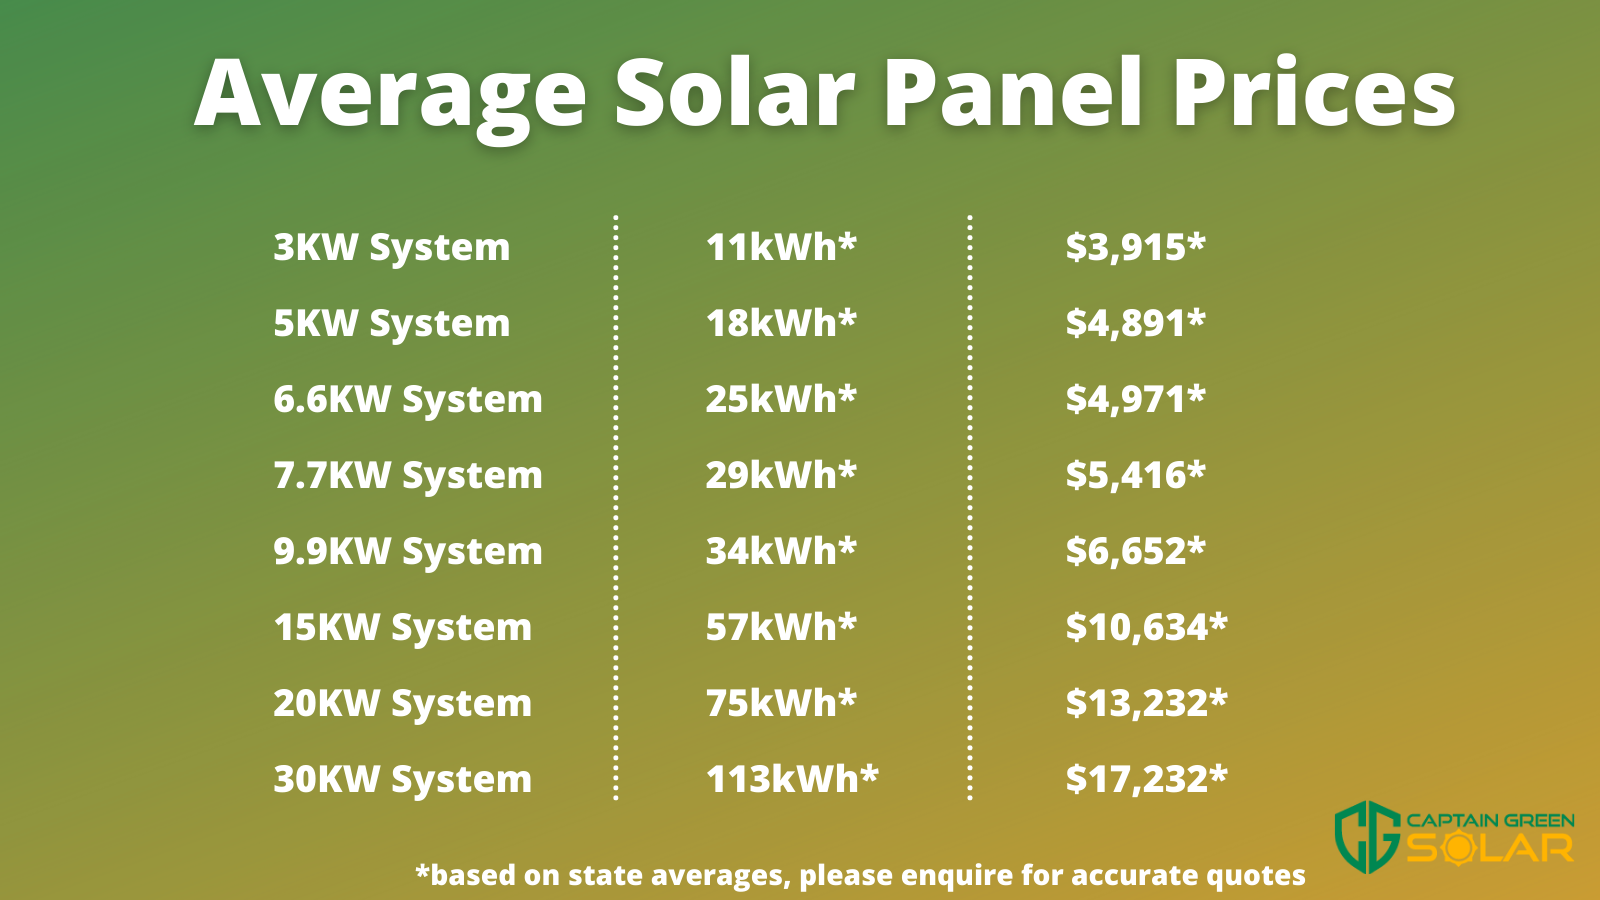 How Much Do Solar Panels Cost in Australia? 2021 Guide